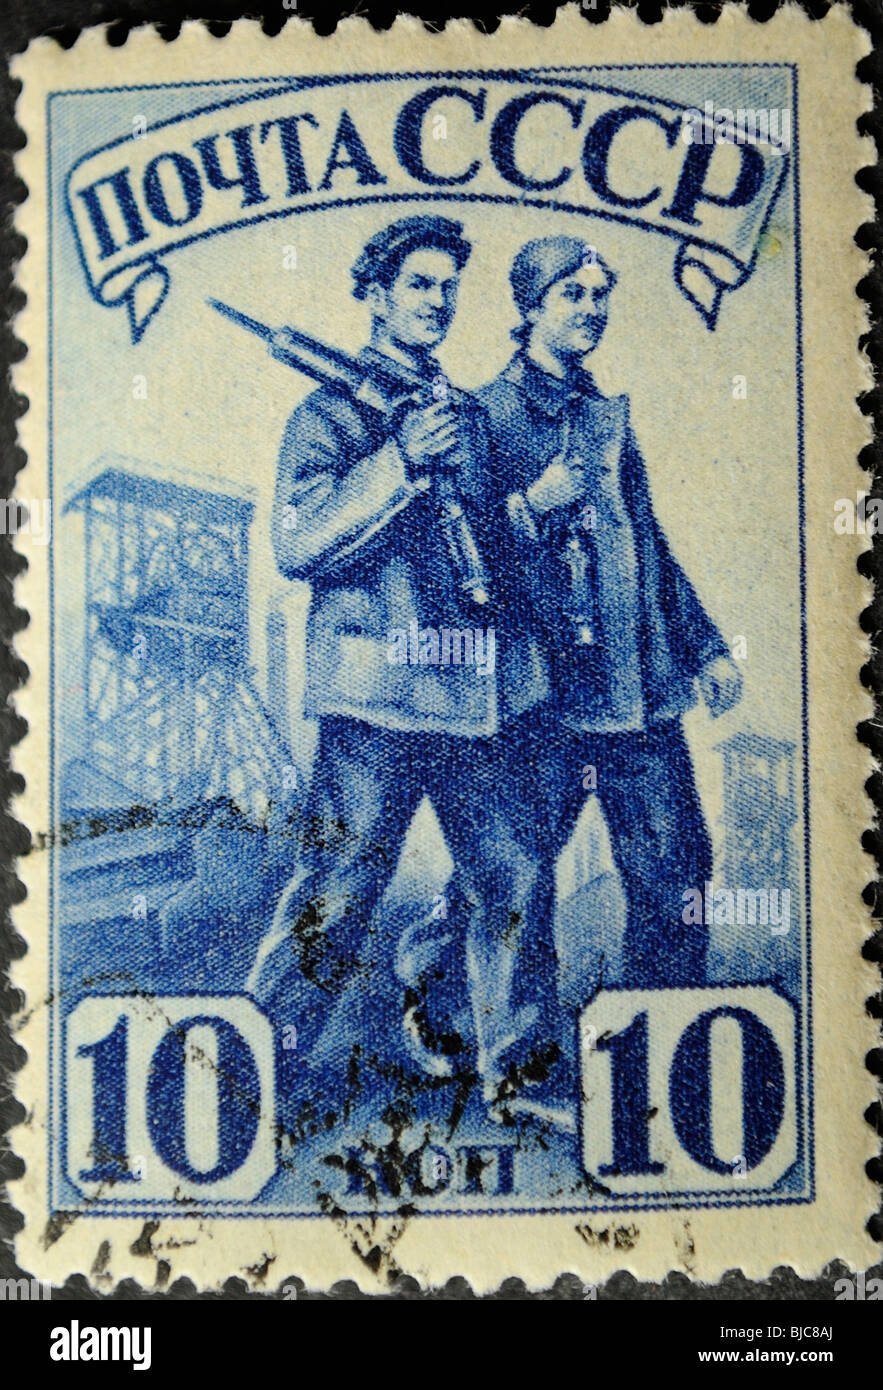 USSR - CIRCA 1941: A Stamp printed in the USSR shows the worker and the working woman, circa 1941 Stock Photo